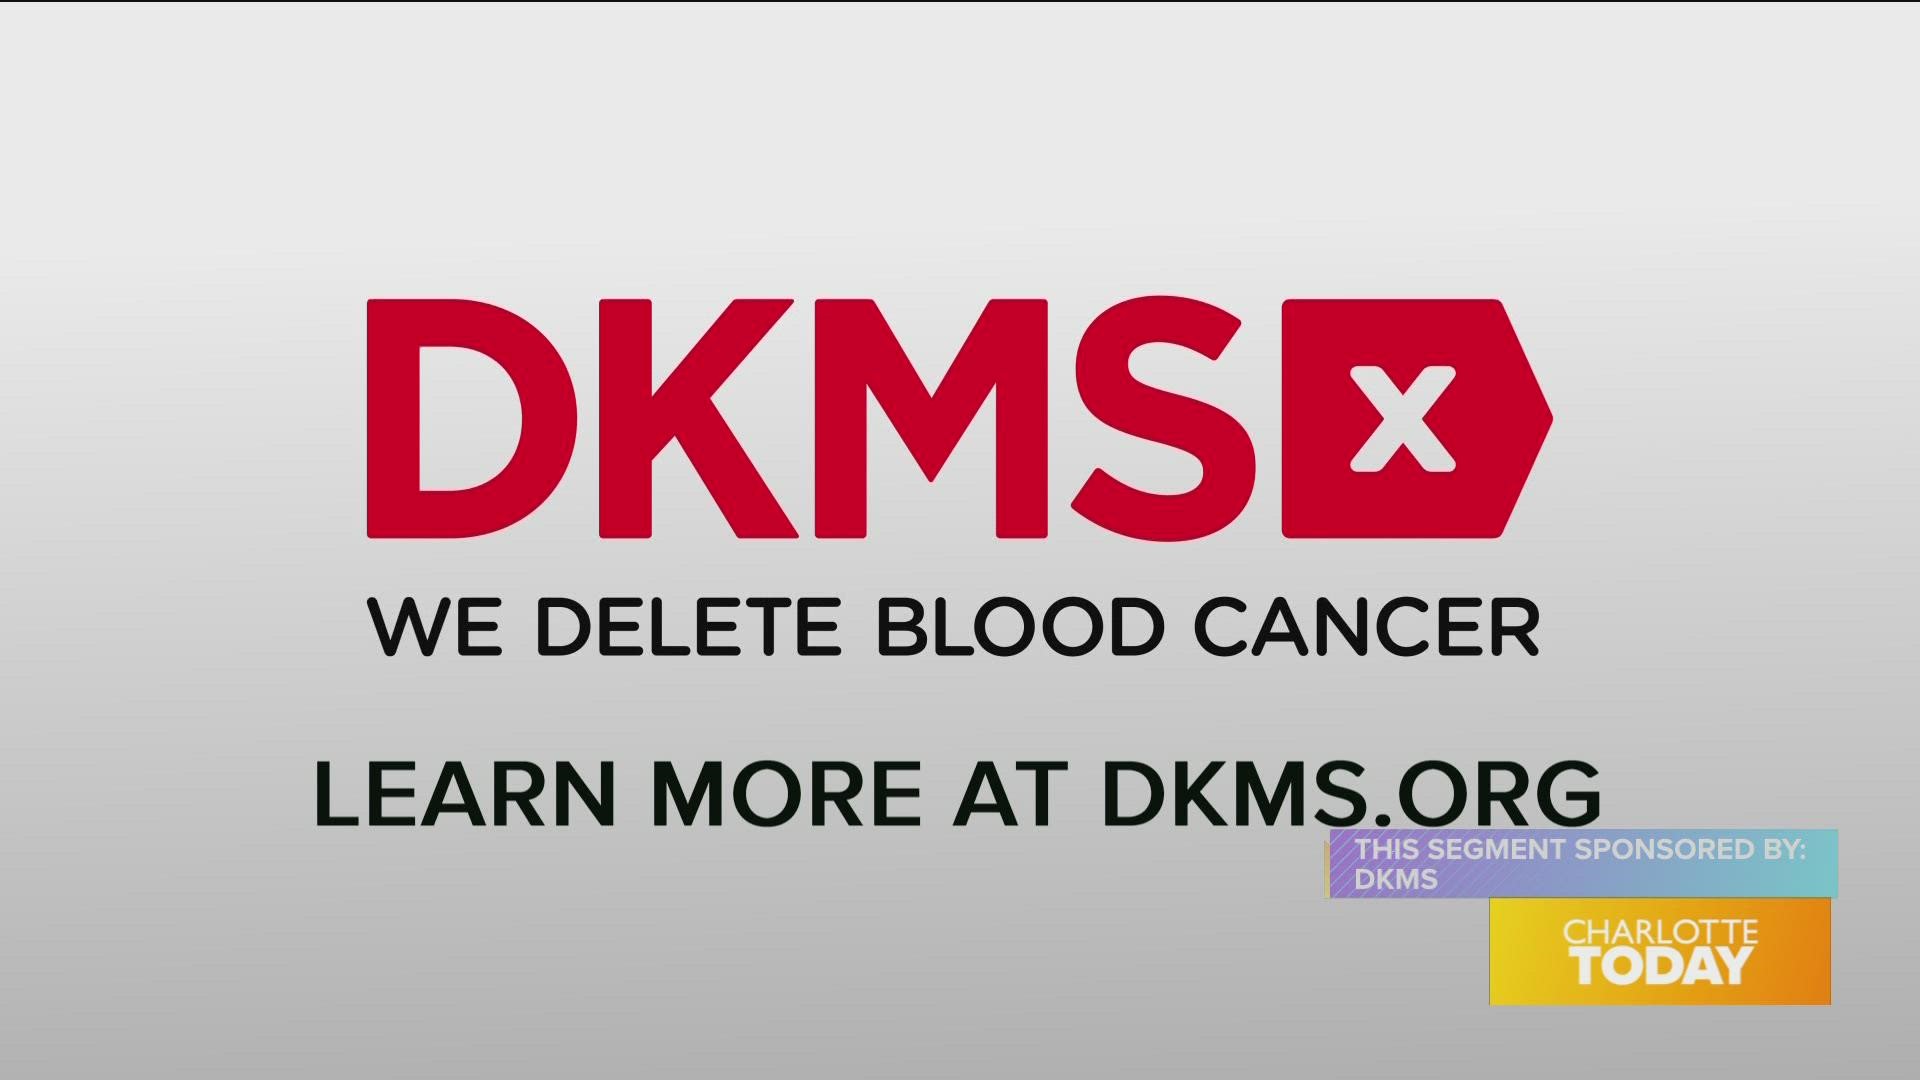 DKMS is dedicated to fighting blood cancers